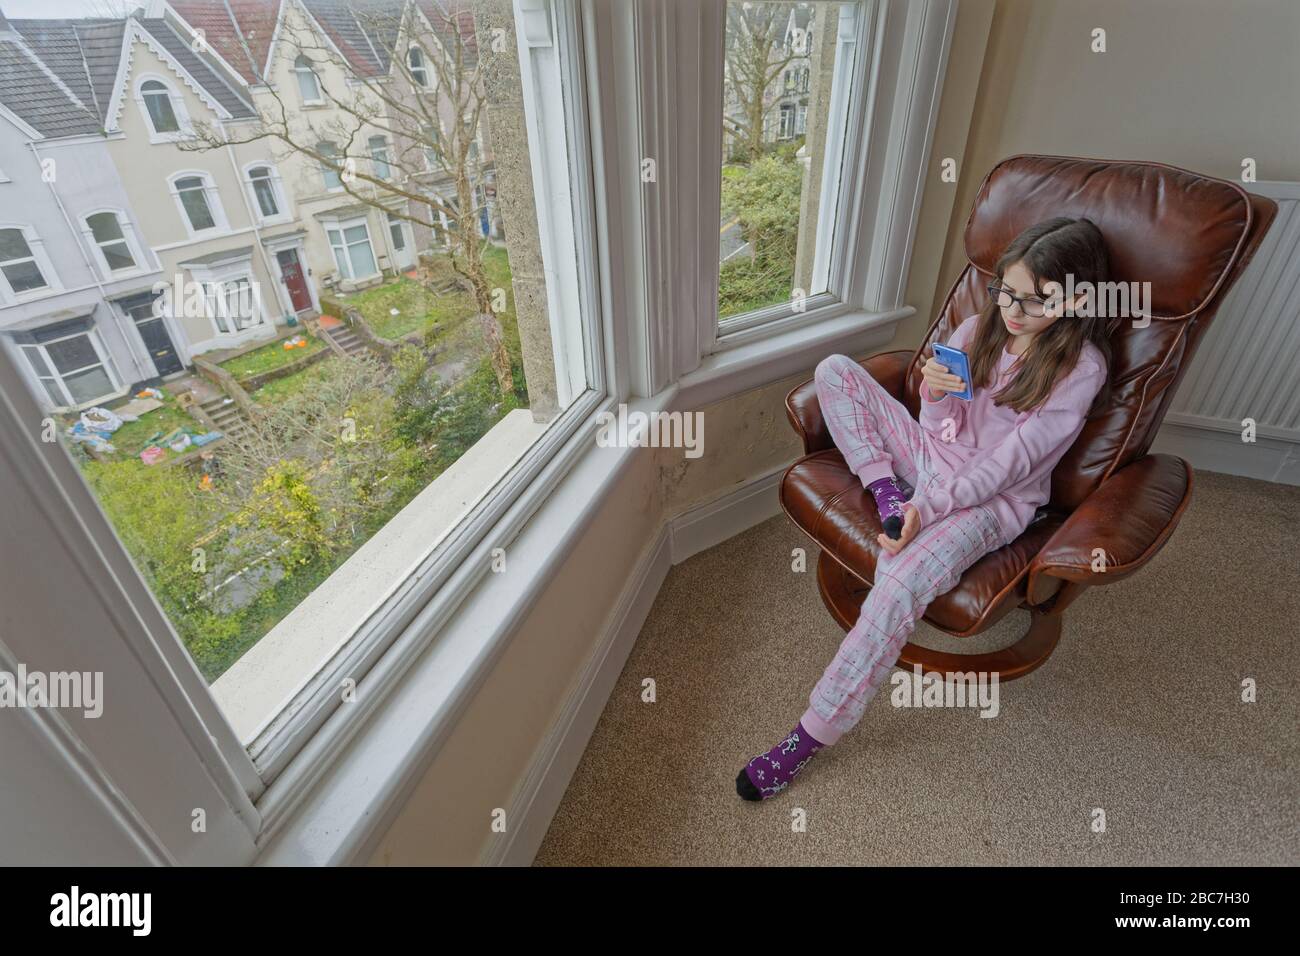 Sophie Rhian, 11, spends time on her mobile phone speaking to friends while self-isolating with her family in Swansea Stock Photo